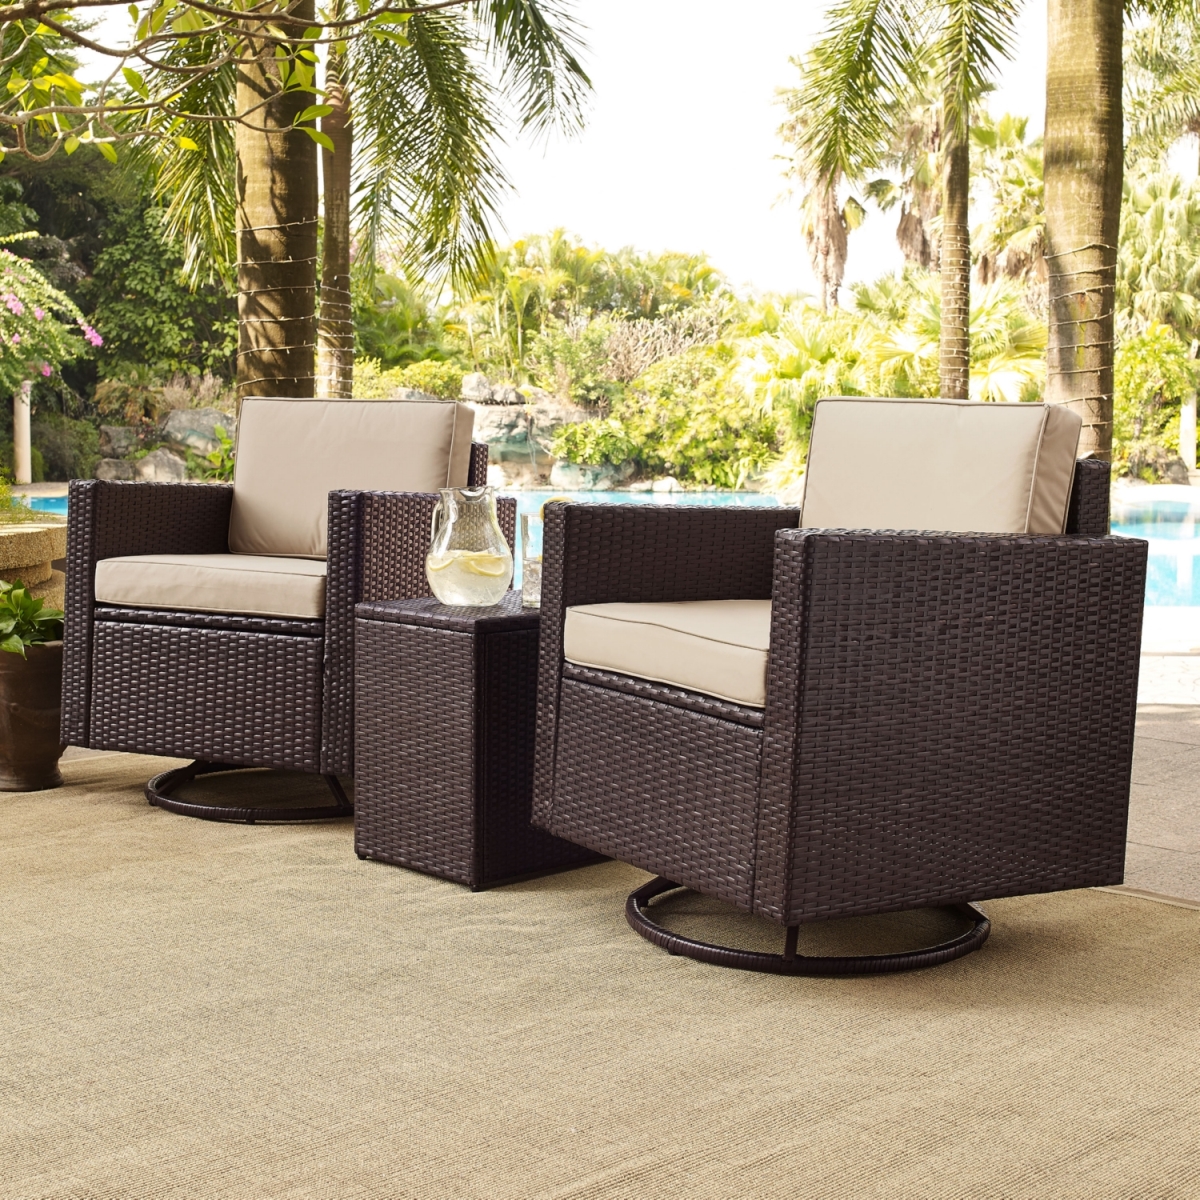 Ko70058br-sa 3-piece Palm Harbor Outdoor Wicker Conversation Set With Sand Cushions, Two Swivel Chairs & Side Table